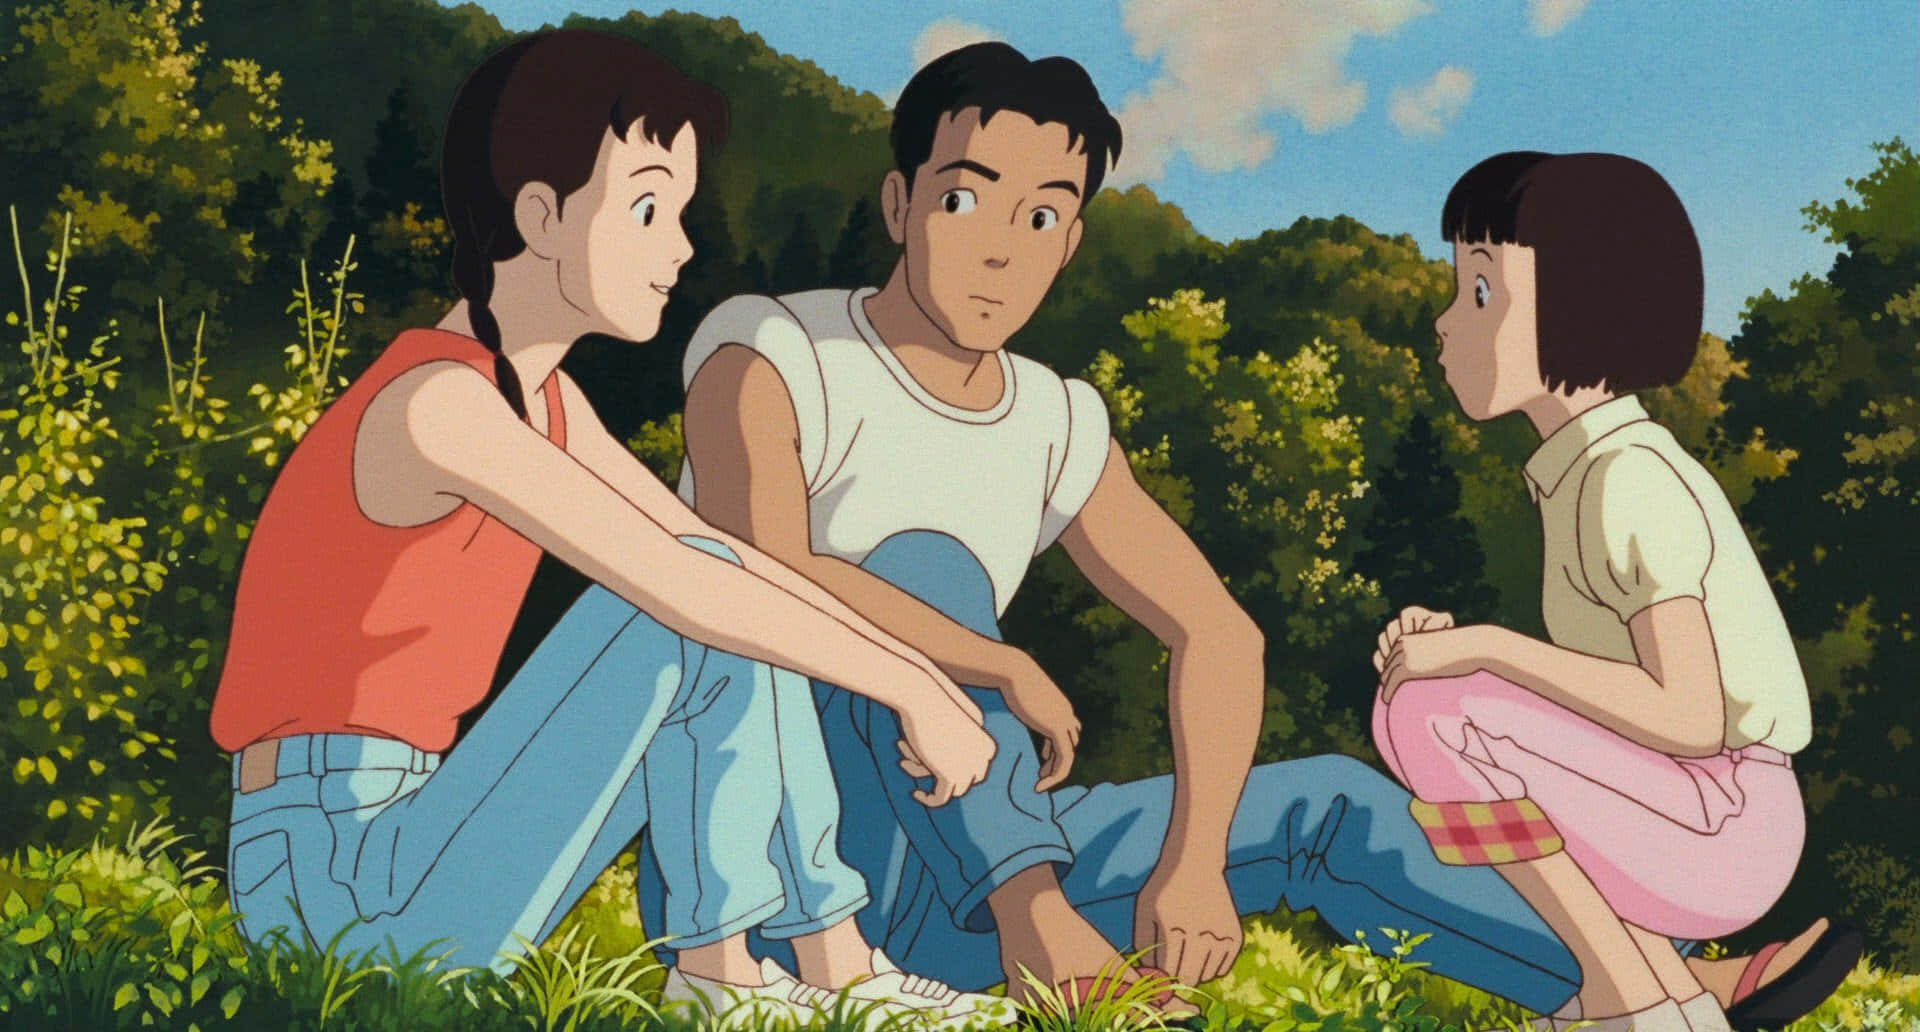 Taeko and Toshio in a blooming field from Only Yesterday Wallpaper